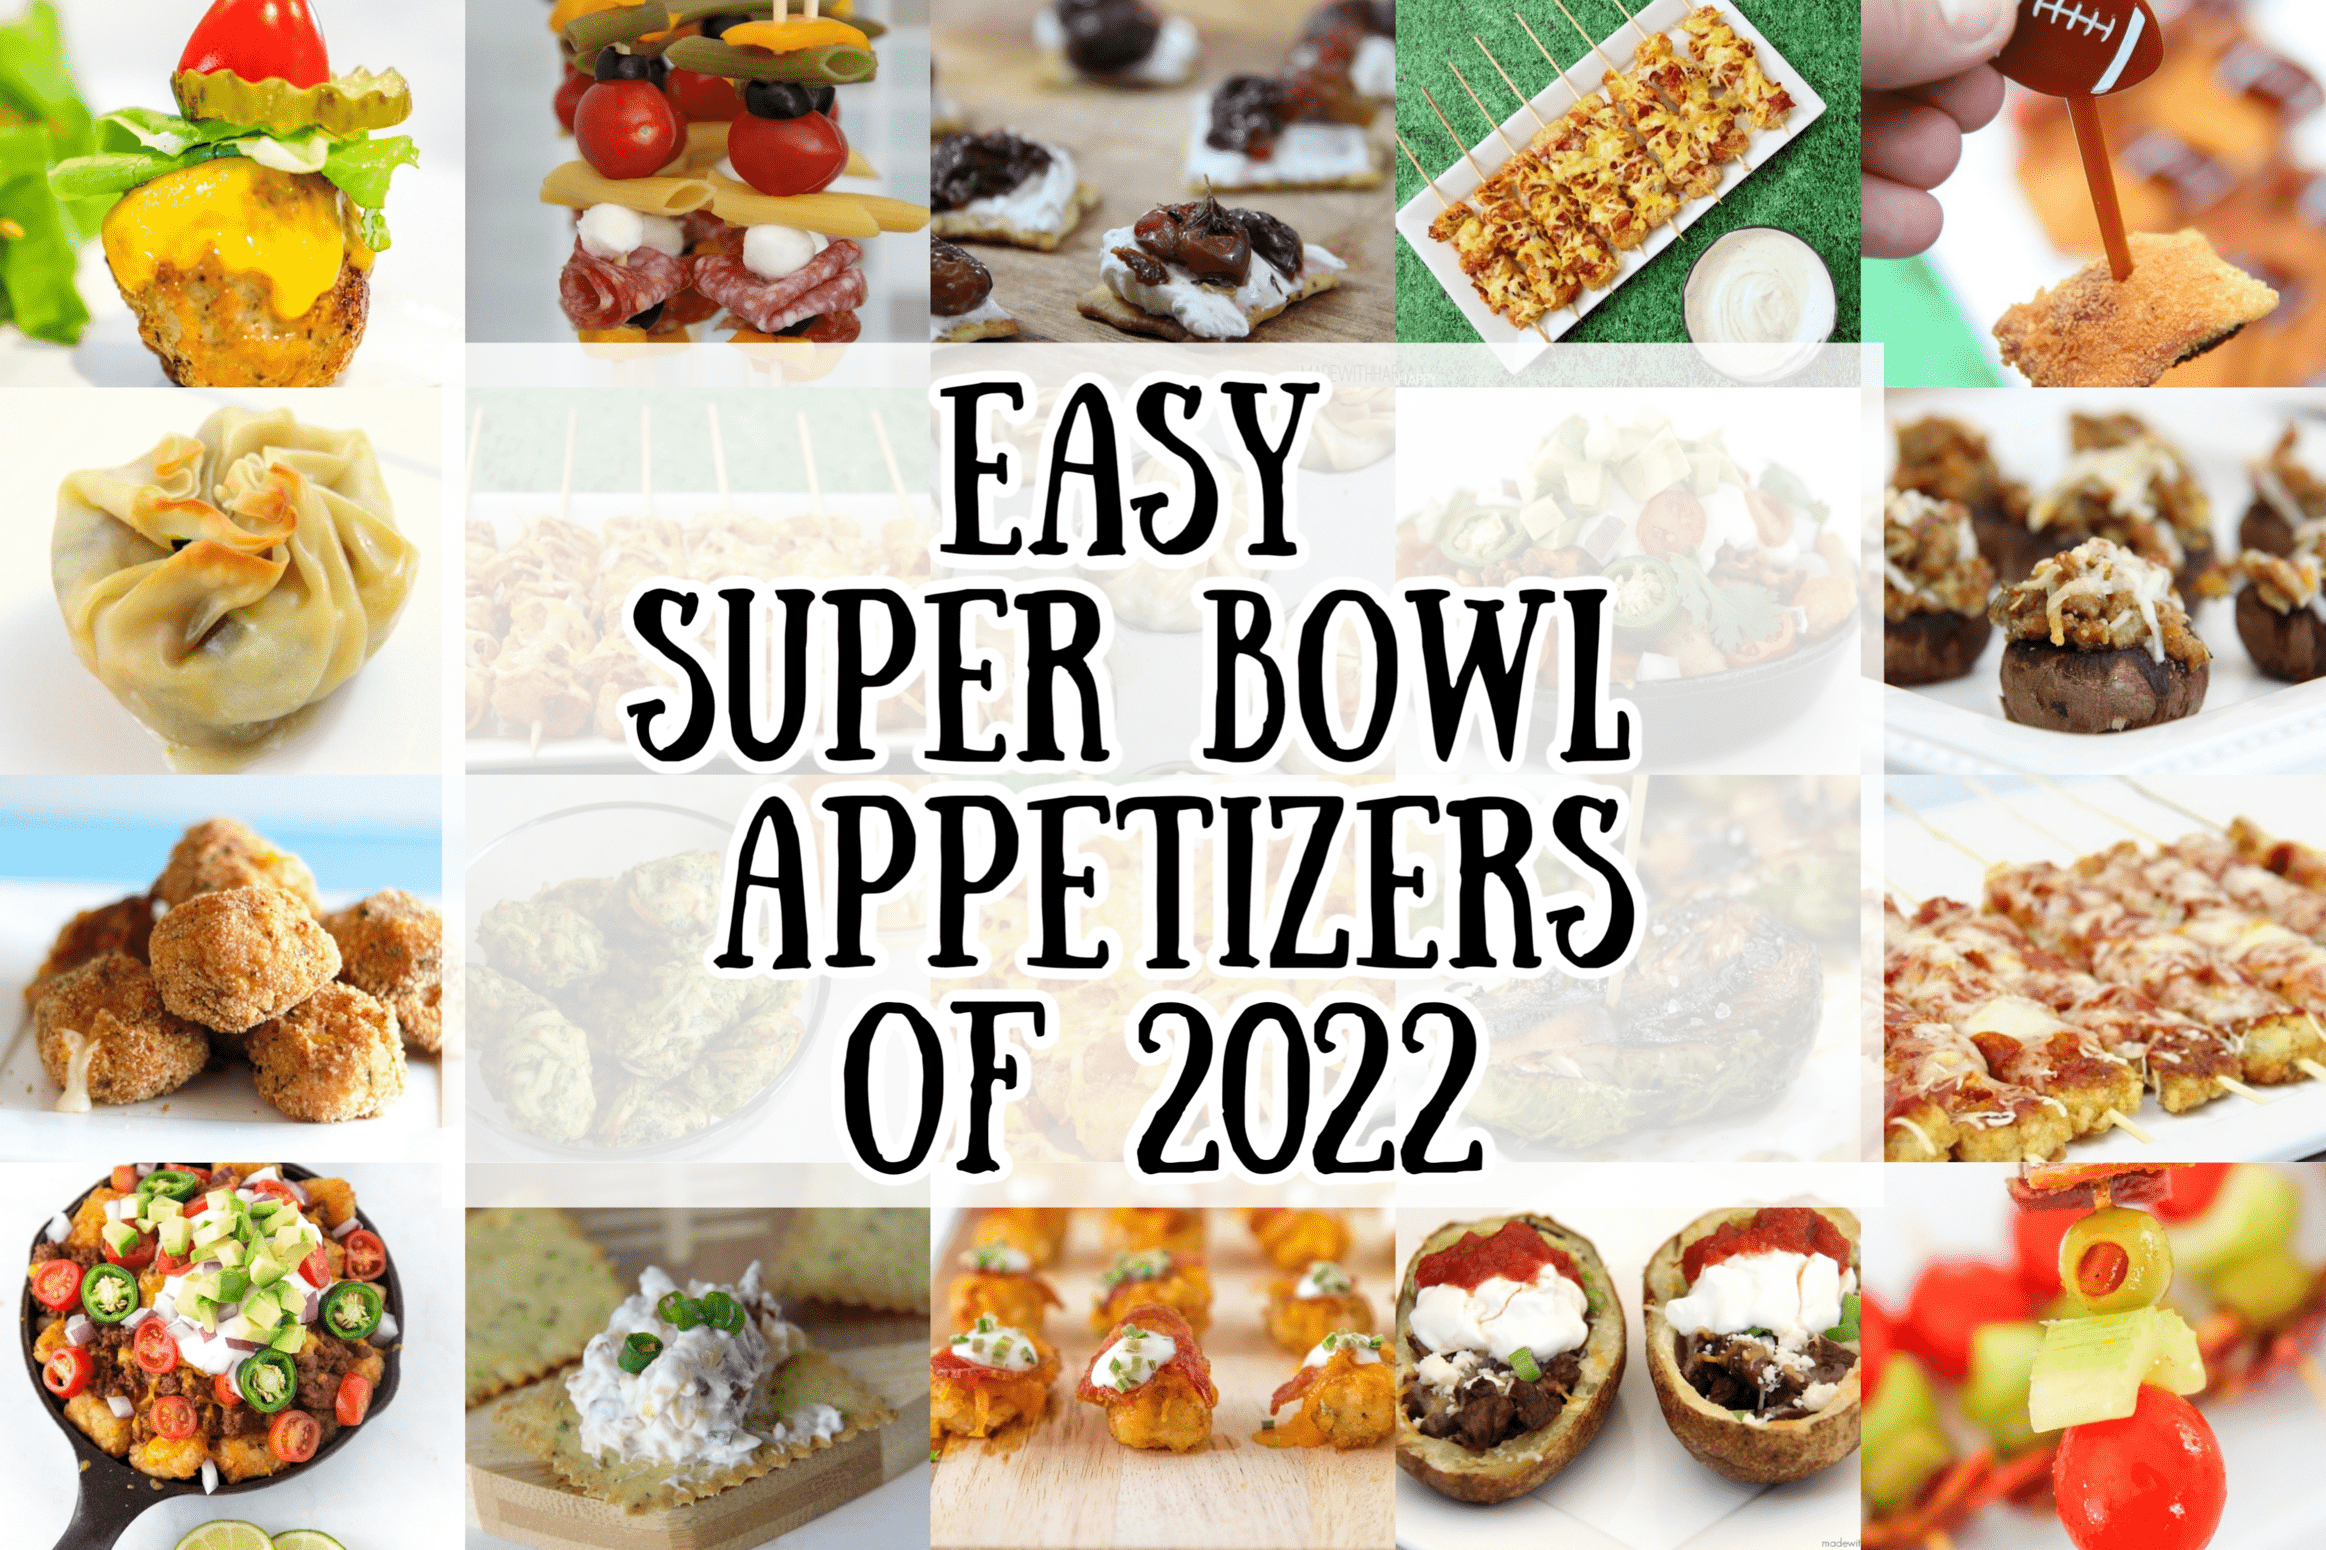 Appetizers for Super Bowl 2022